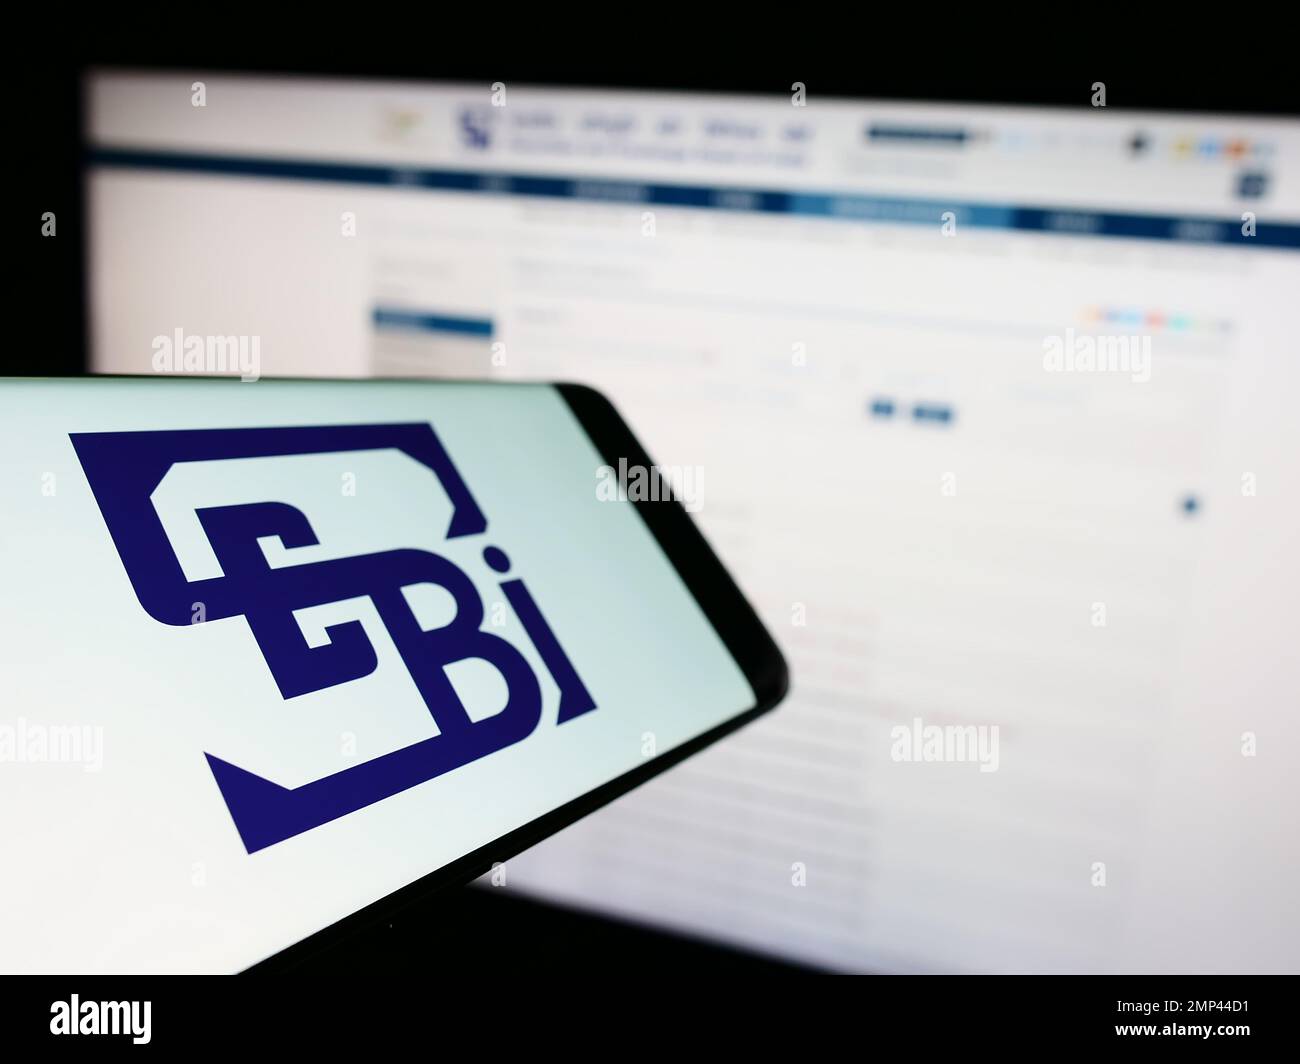 Smartphone with logo of Securities and Exchange Board of India (SEBI) on screen in front of website. Focus on left of phone display. Stock Photo